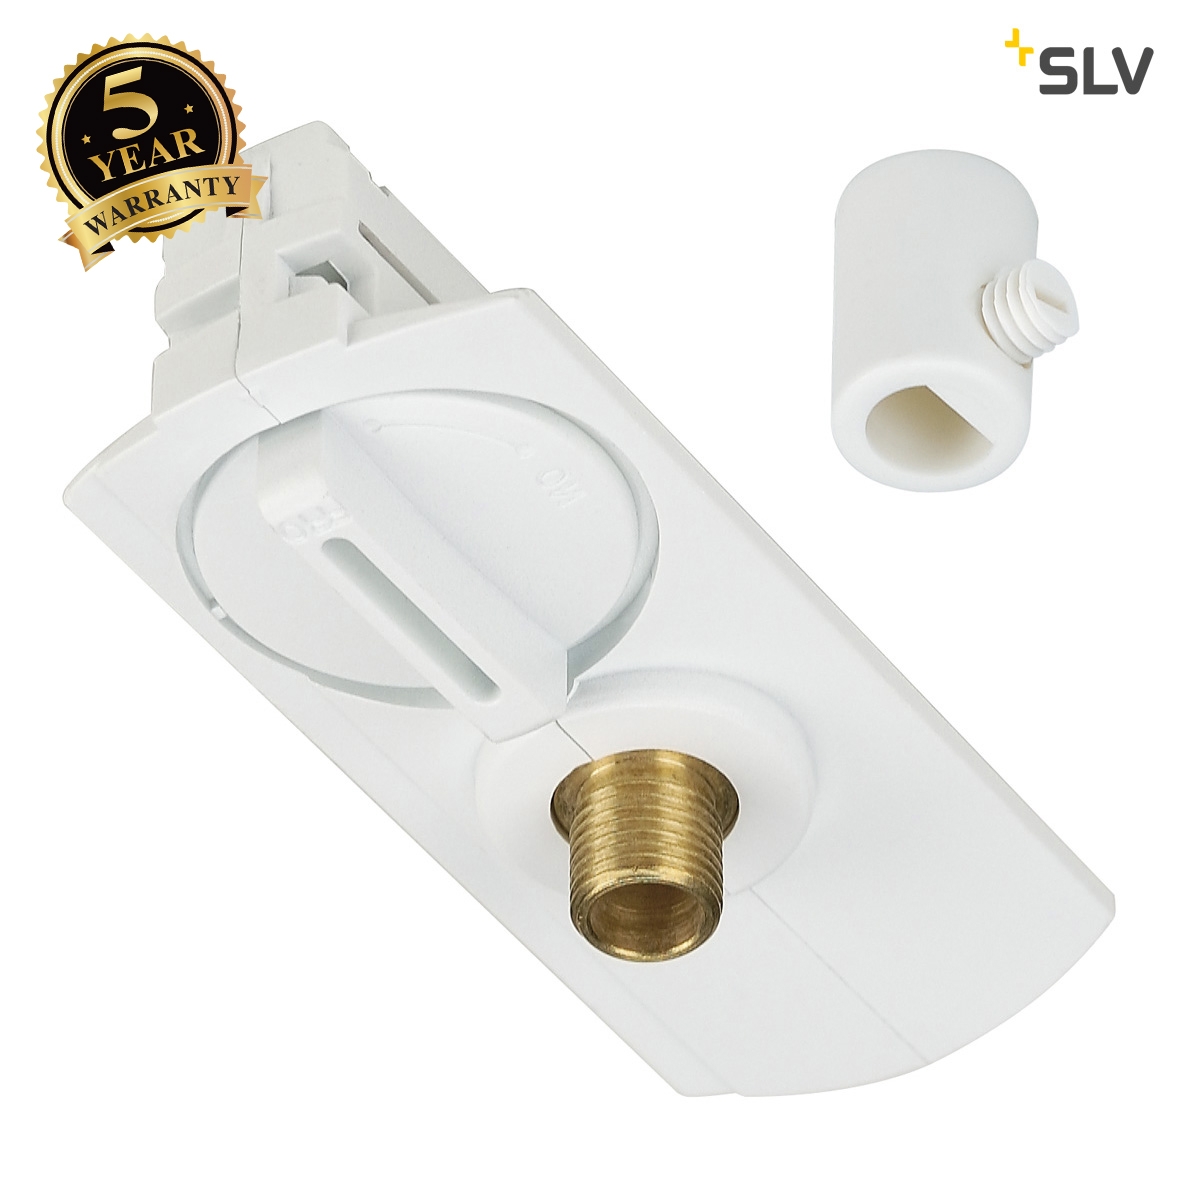 SLV 1-circuit pendant adapter, white, incl. strain-relief and threaded piece 143121